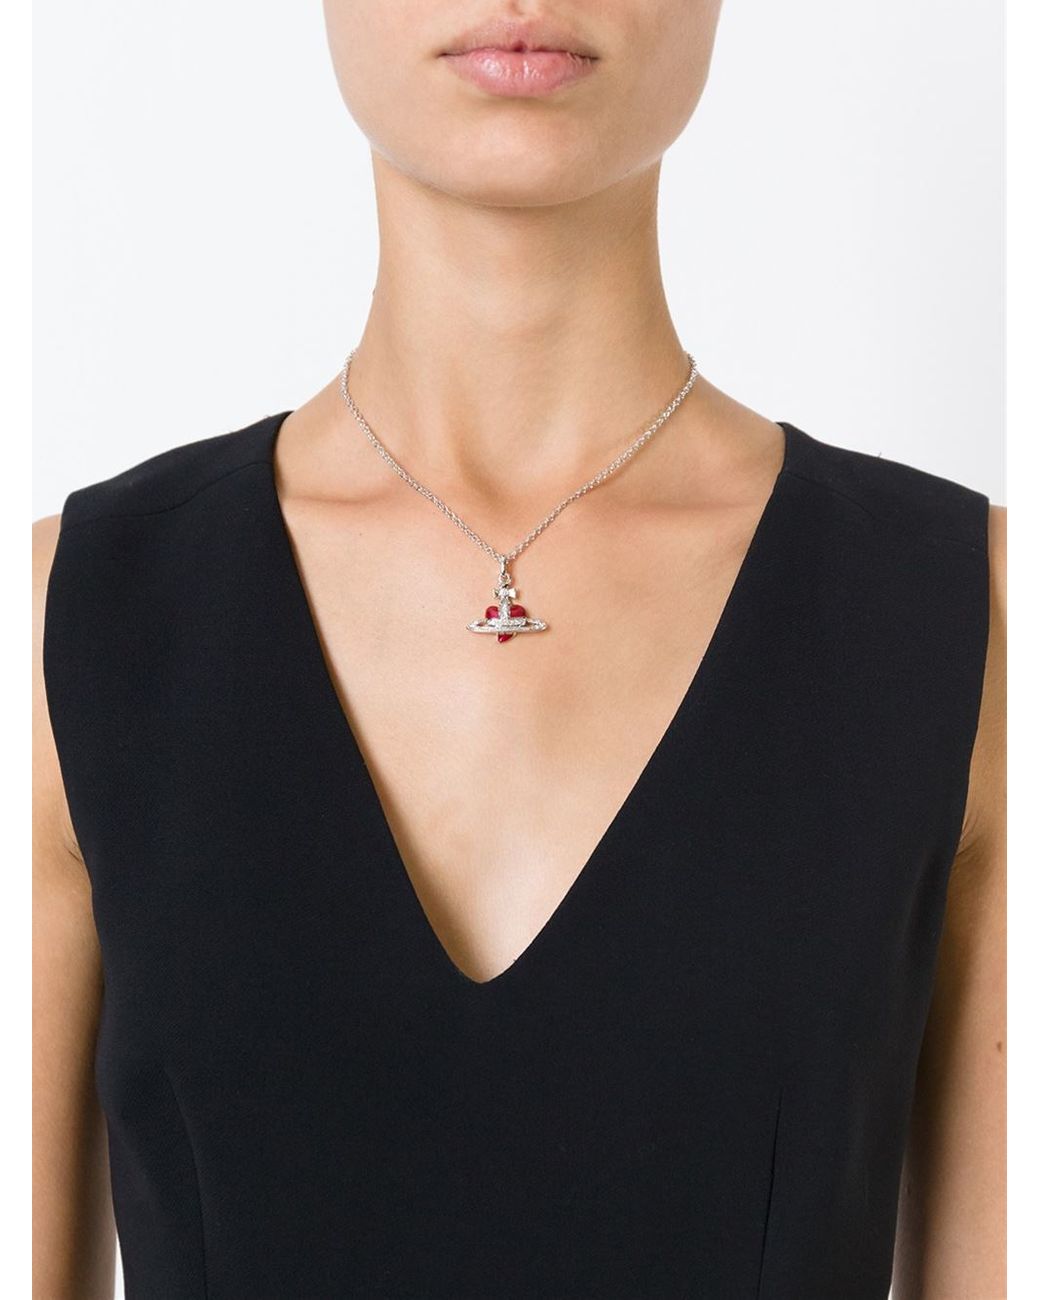 Vivienne Westwood Anglomania 'diamante Heart' Pendant Necklace in Metallic  | Lyst